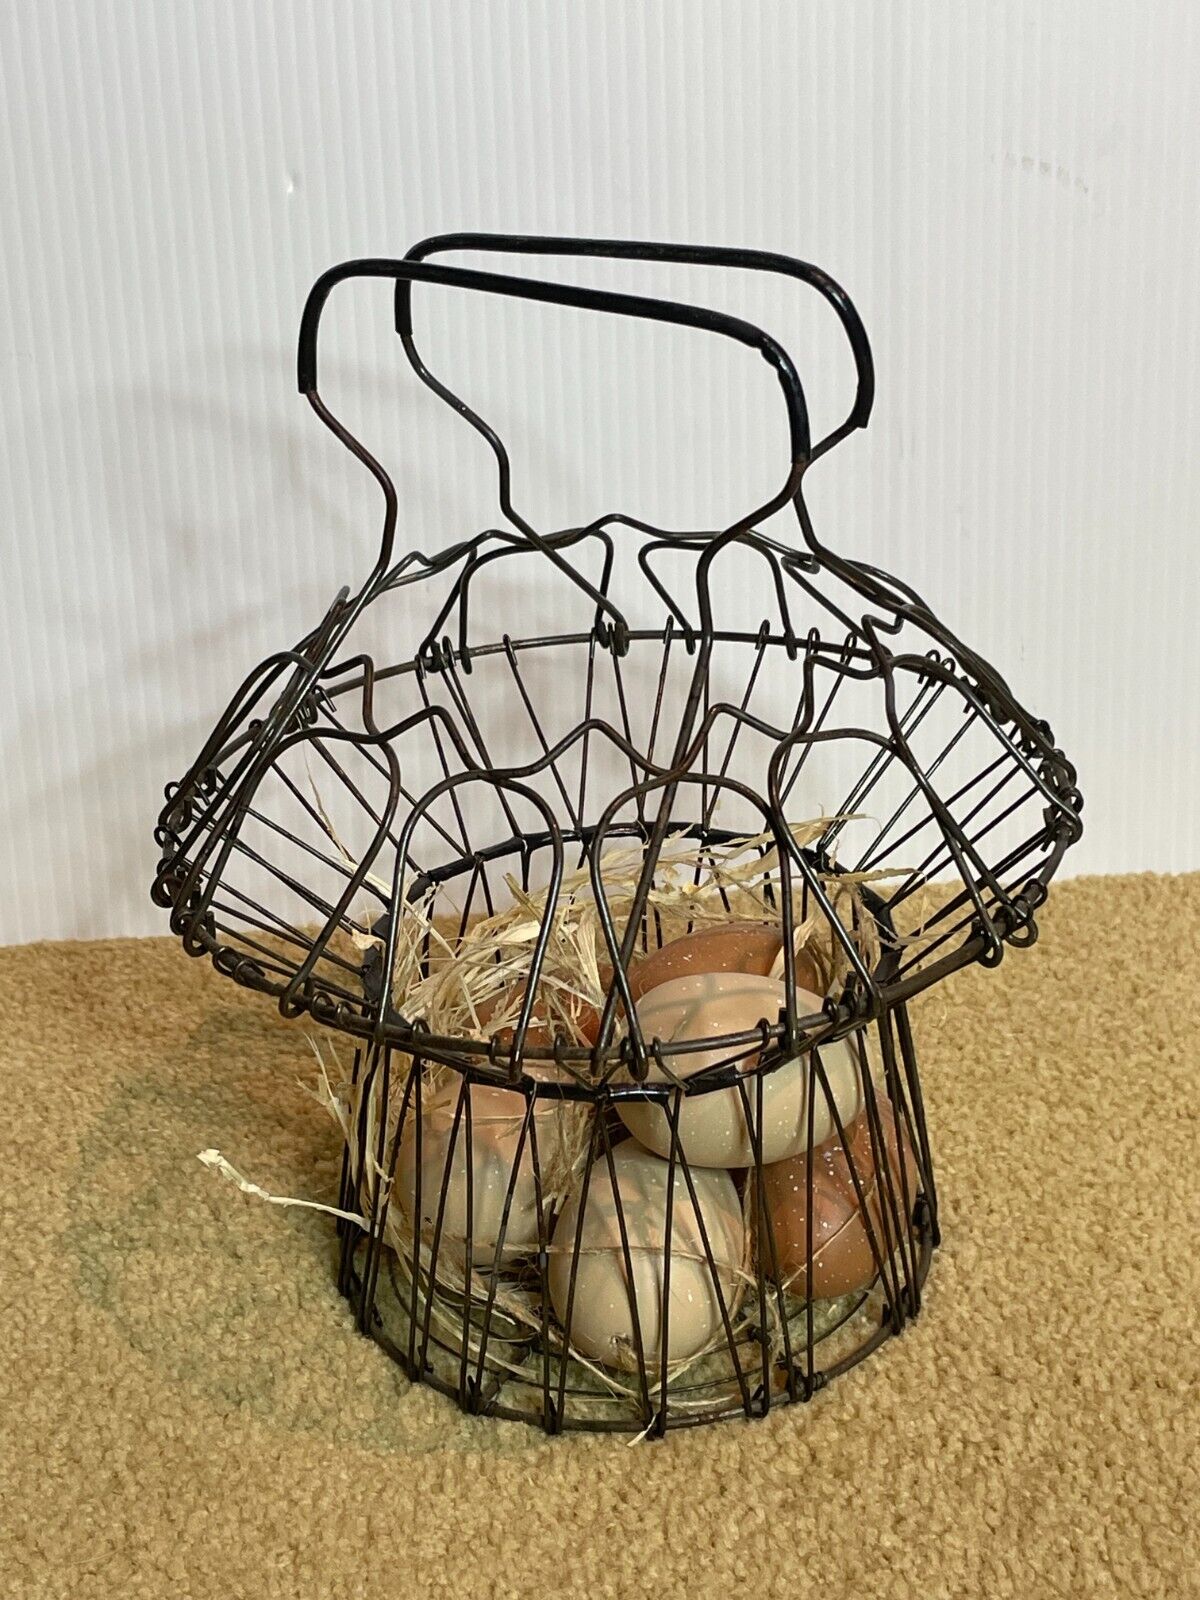 NEW Farmhouse Chicken Wire Metal Basket Rustic Expandable Small French + Eggs